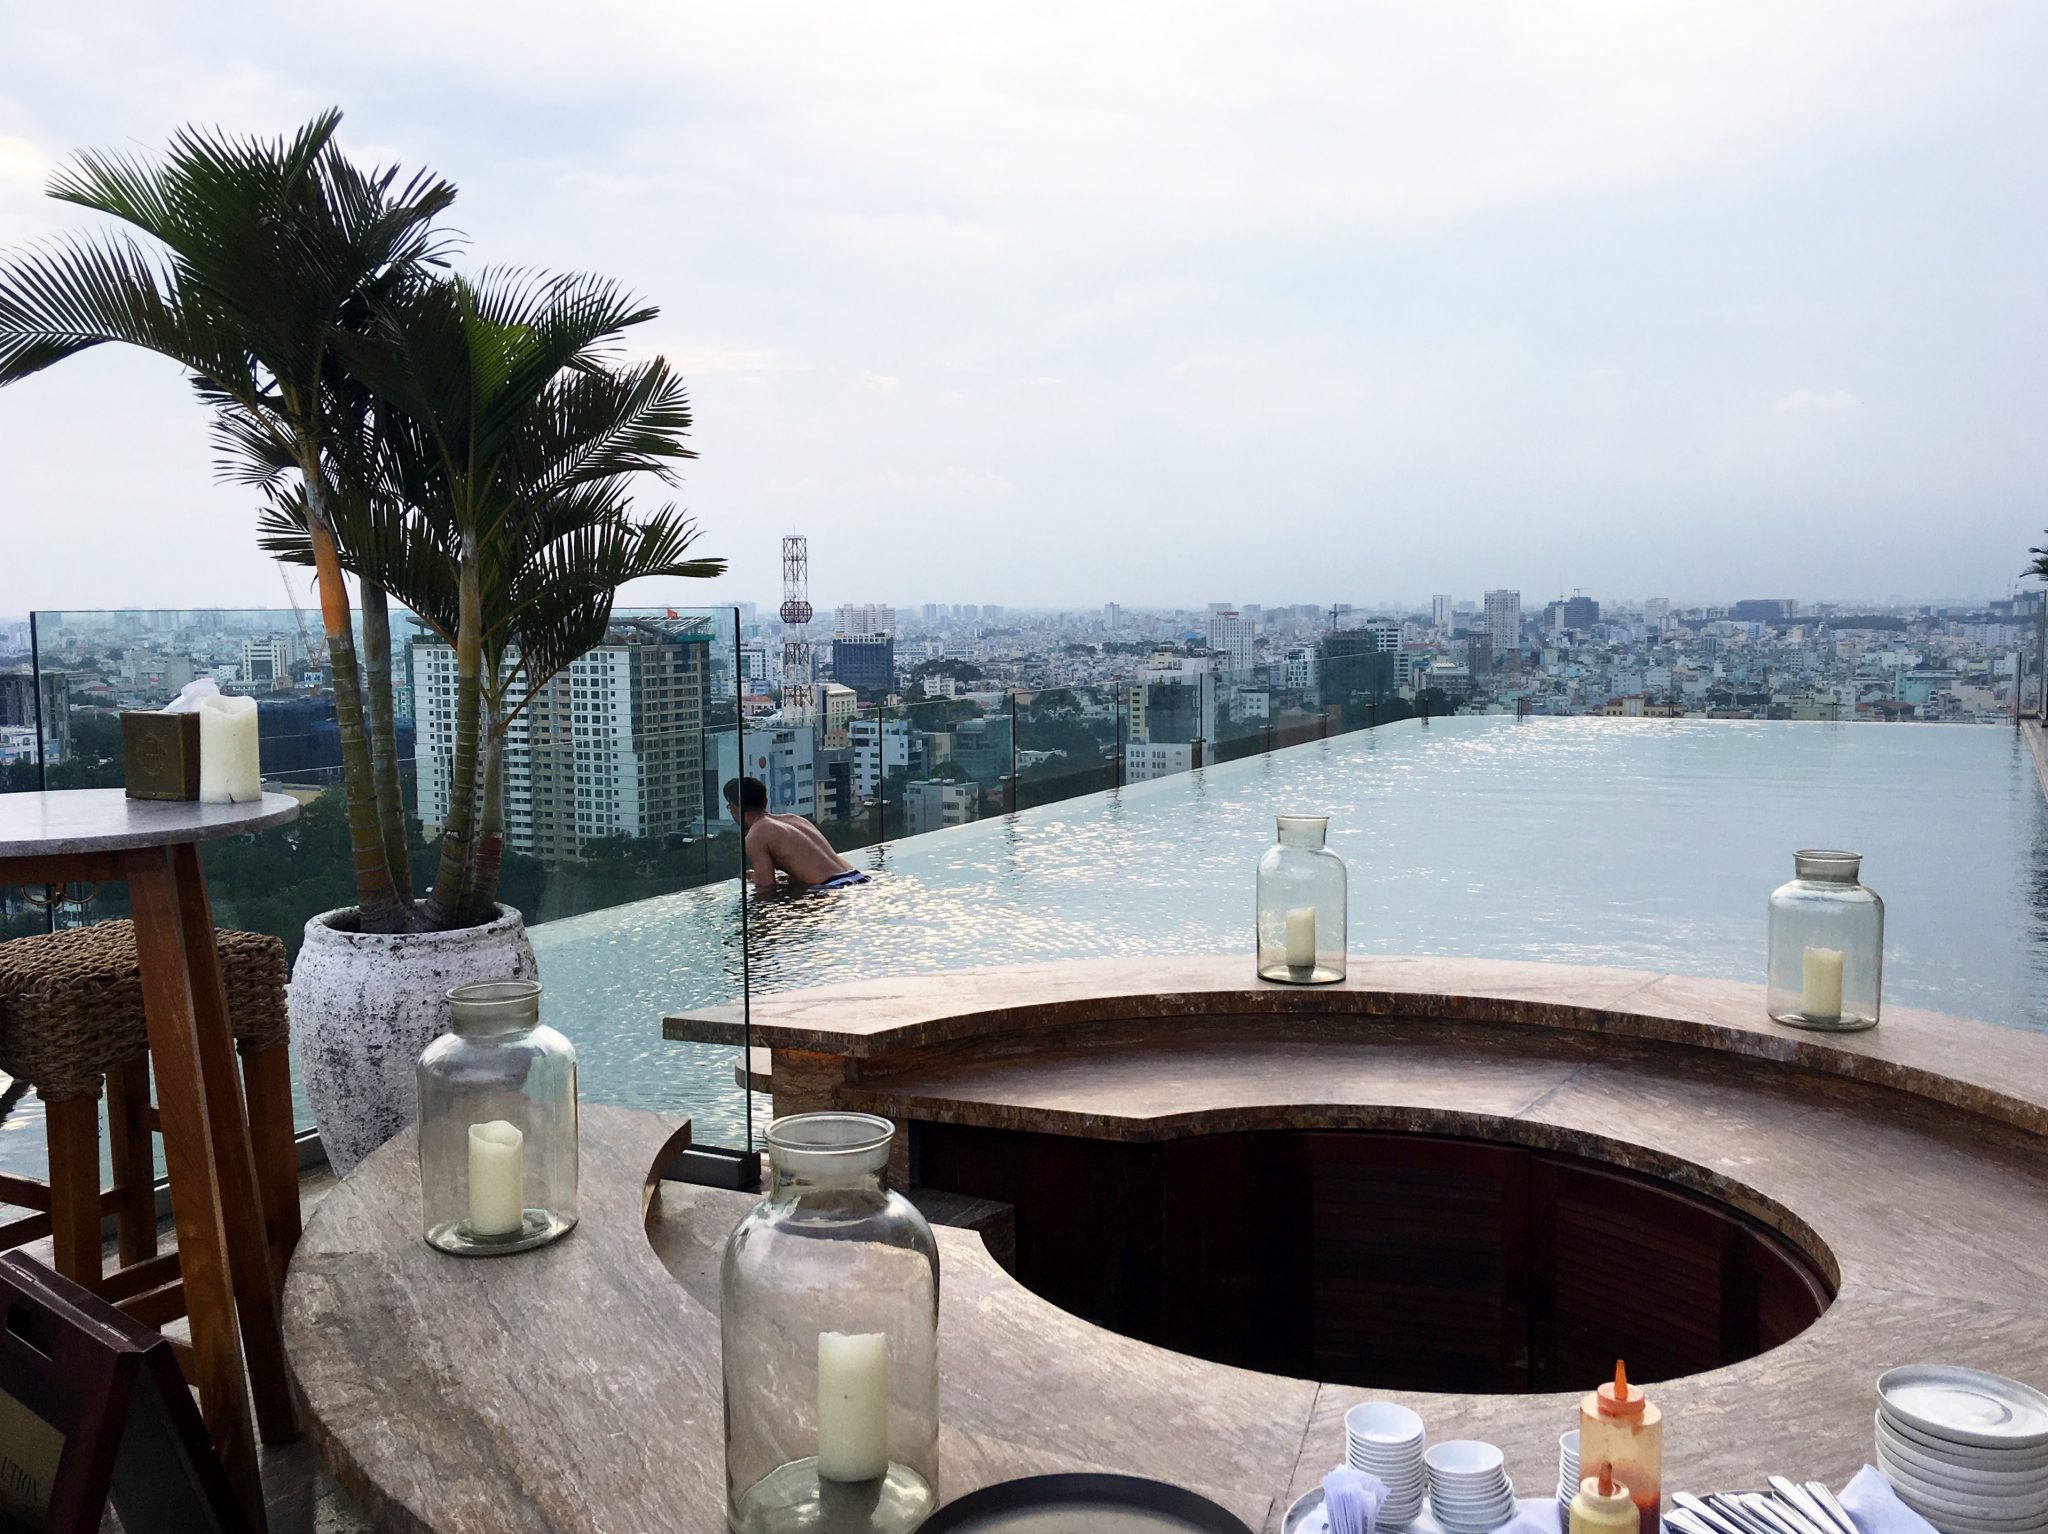 Social Club Hotel des Arts: Could this be Saigon’s Best Rooftop Bar?